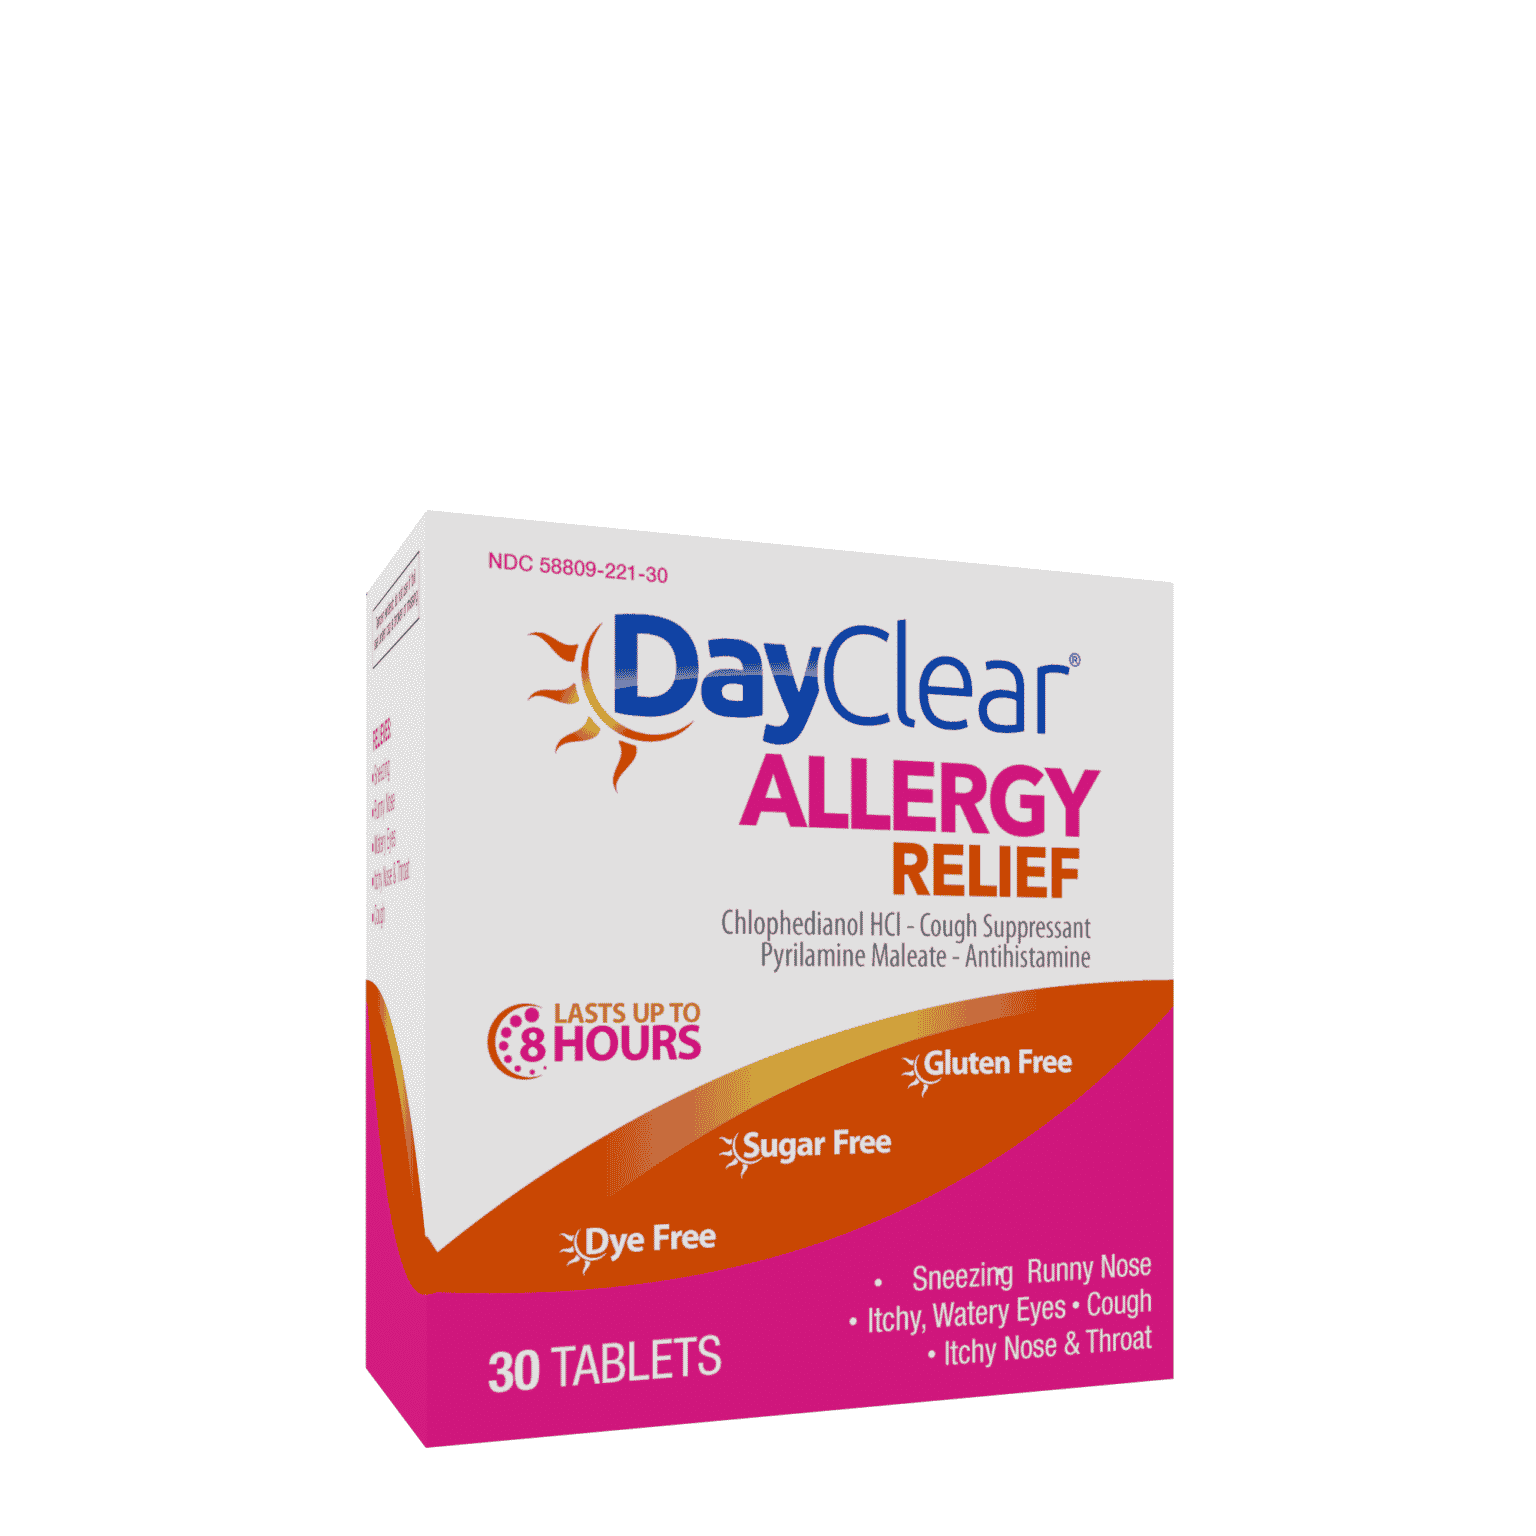 DayClearÂ® Allergy Relief Tablets bring fast